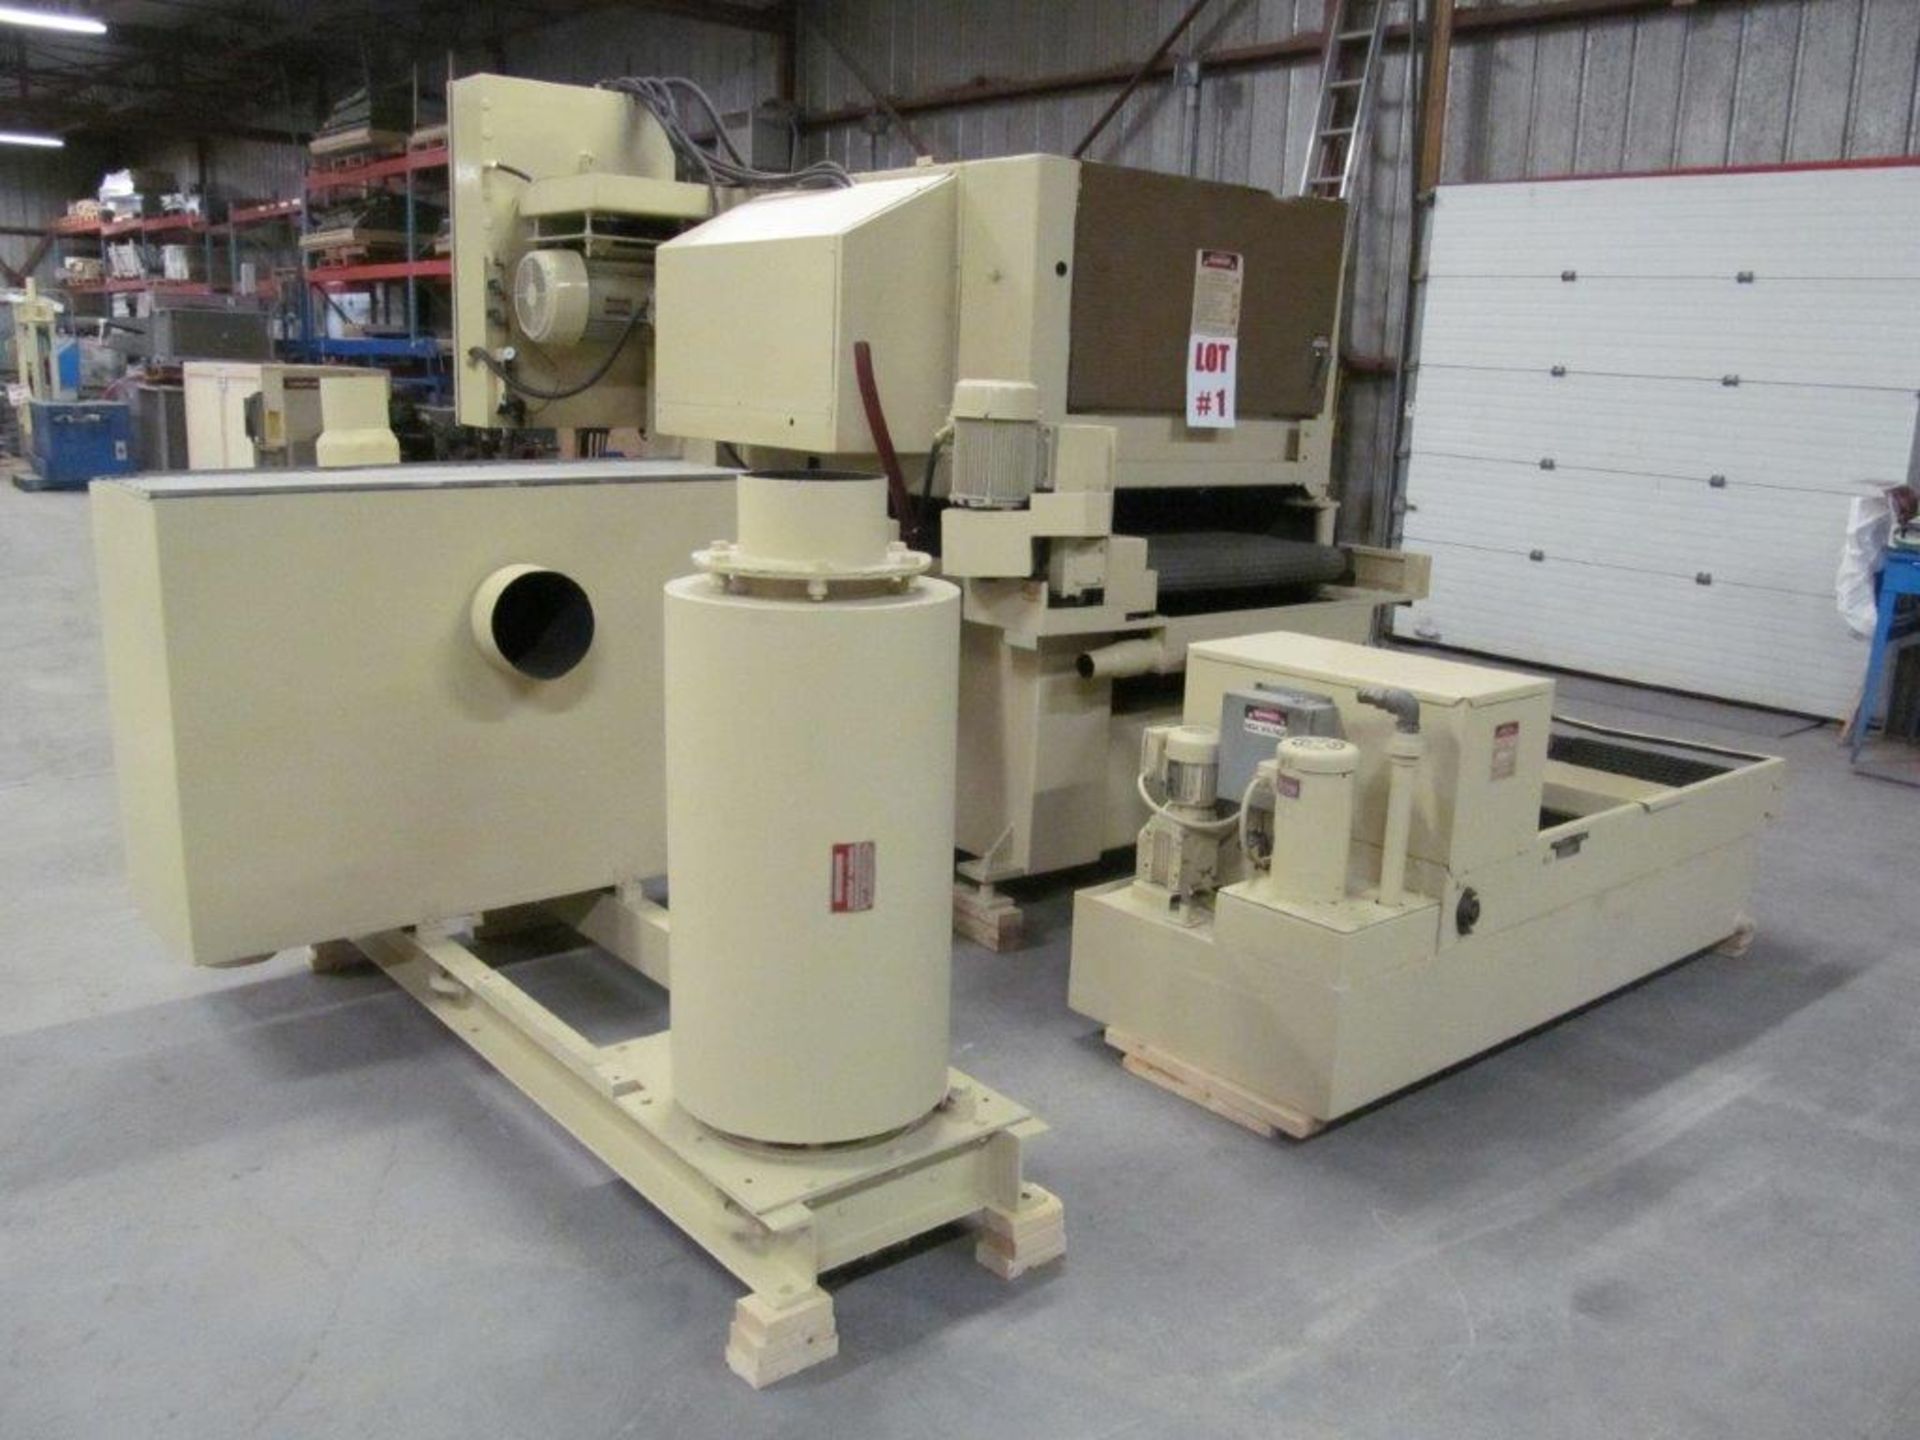 TIMESAVER MODEL 237-2CMPLW, S/N: 19989, 36" WIDE MATERIAL WET TYPE, ELECTRICS: 575 V / 3PH / 60C, - Image 6 of 14